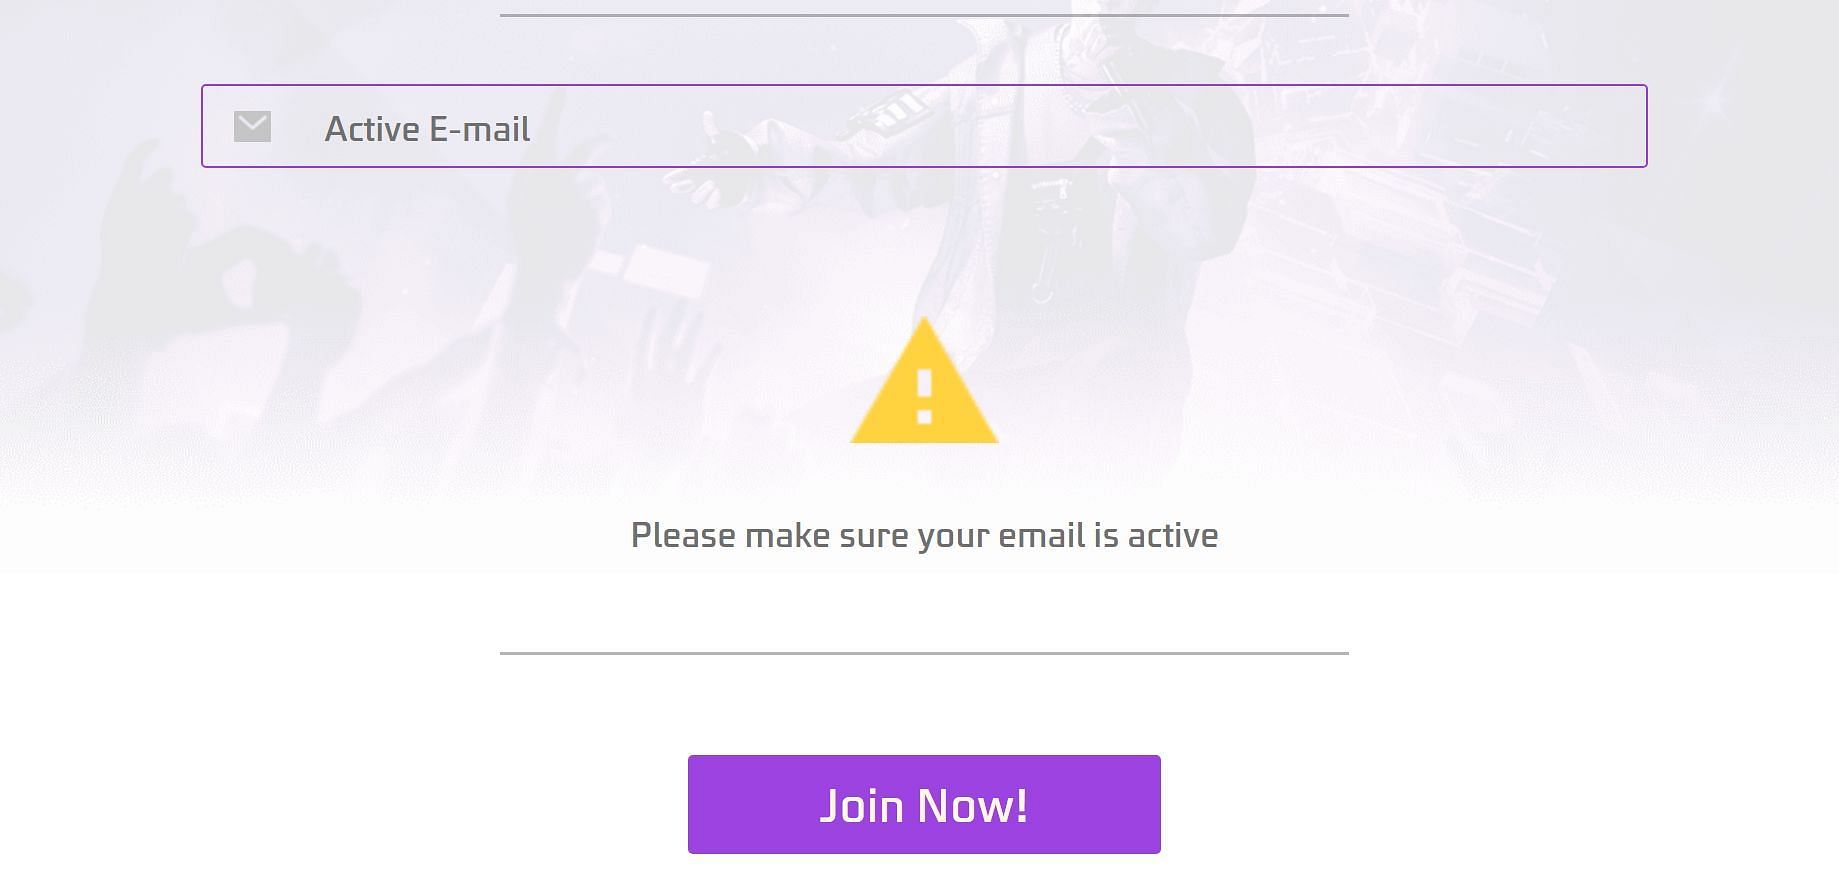 One must click &quot;Join Now!&quot; after filling in his/her active e-mail (Image via Garena)